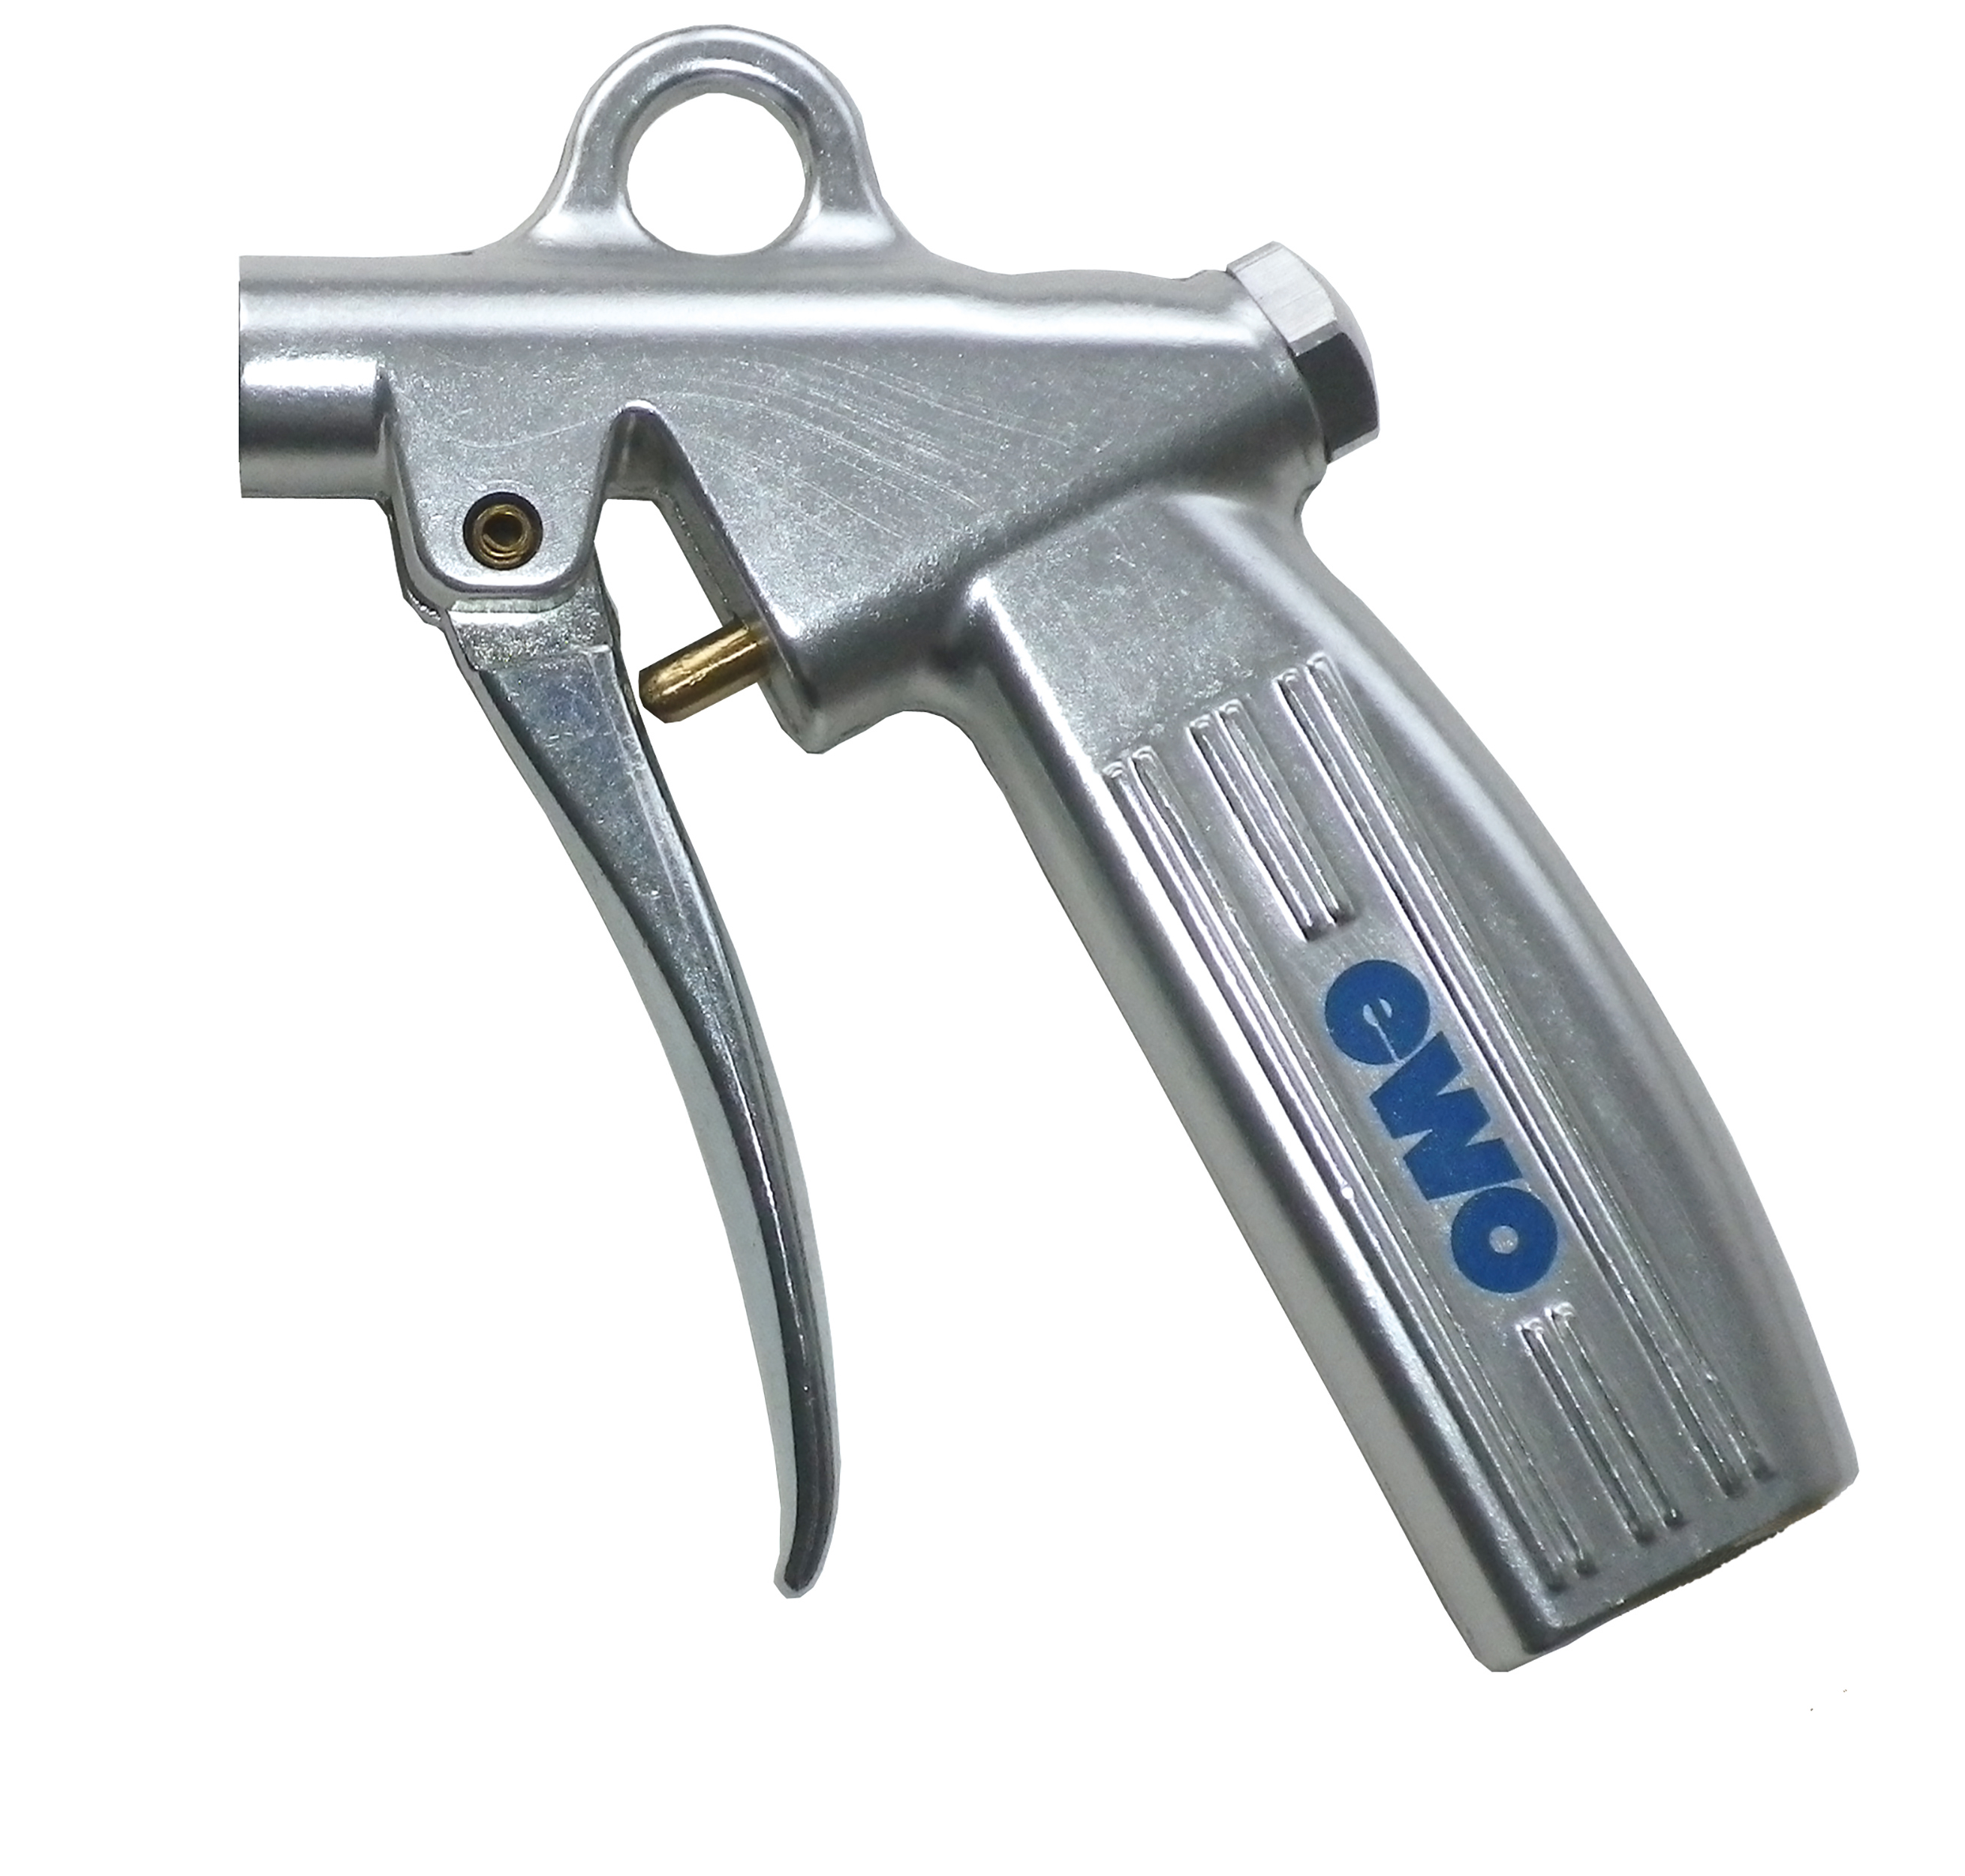 Blow gun, inlet: G¼ f, outlet: M12 × 1.25 f, aluminium, forged, clear anodised, recommended operating pressure: 29–116 psi, 240 g